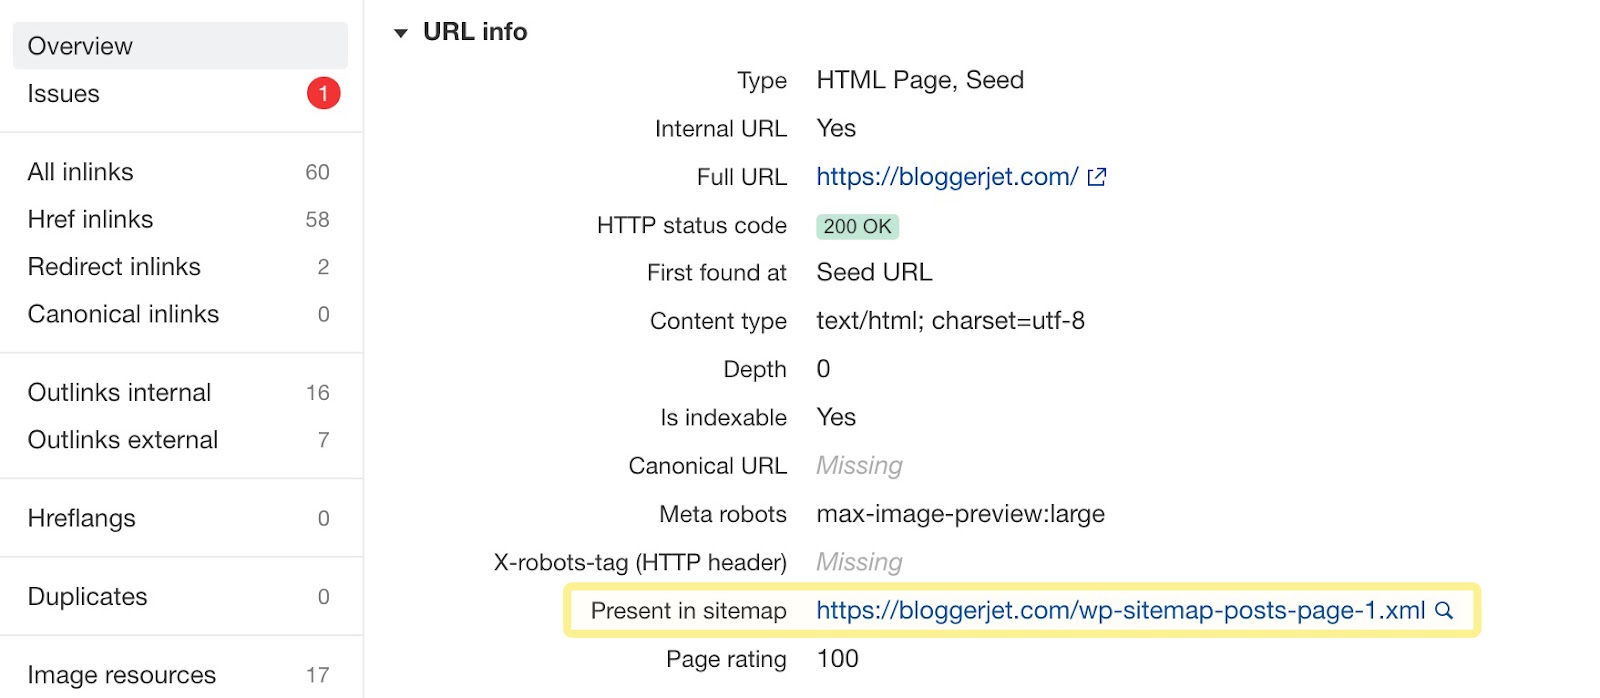 “Present in sitemap” field with a link to the sitemap in URL details